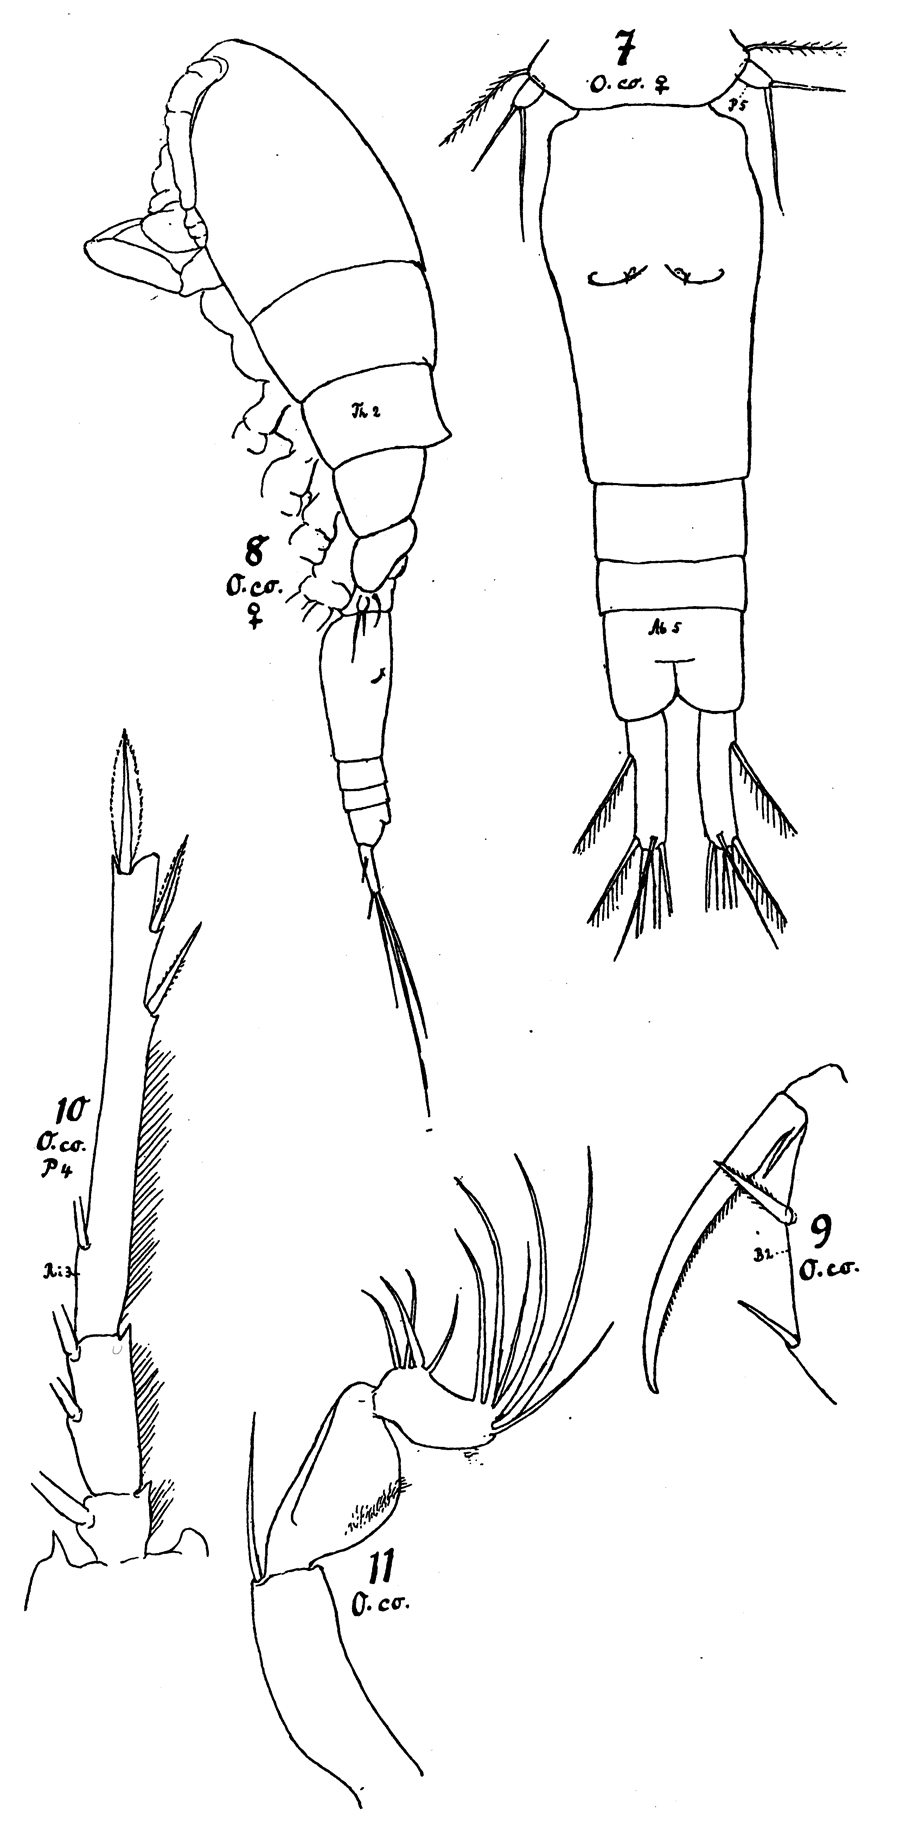 Species Triconia antarctica - Plate 5 of morphological figures